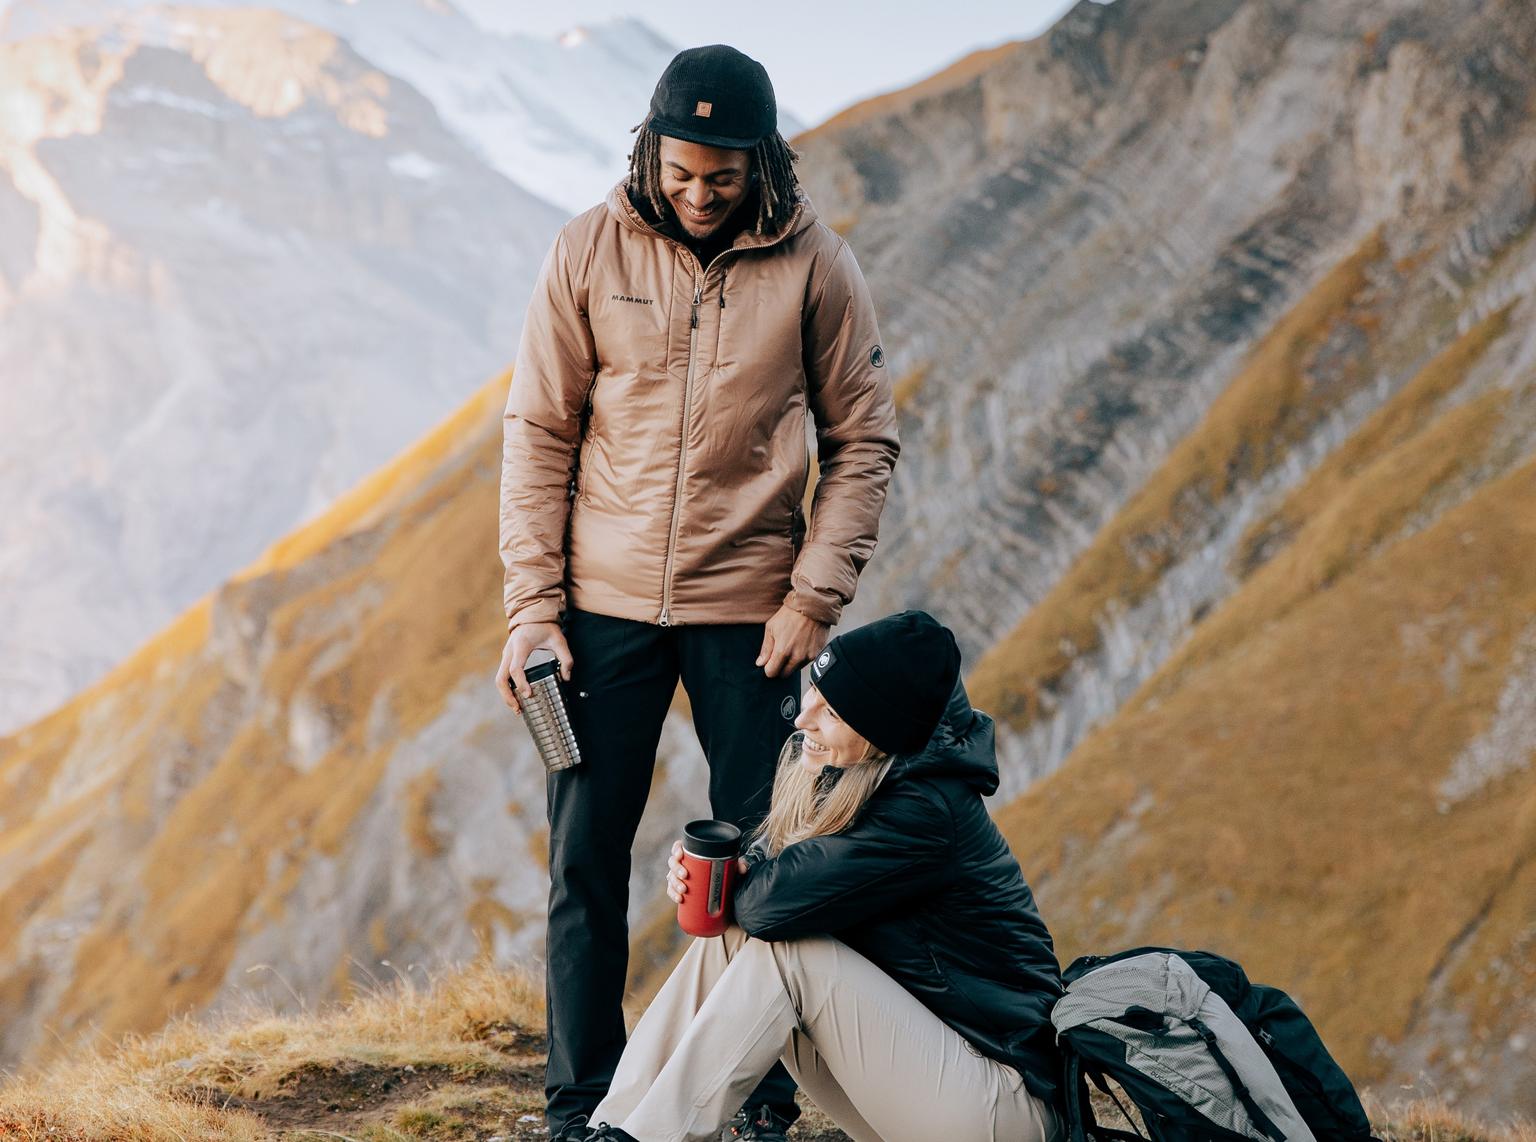 Three of Switzerland's innovative brands have joined forces to create the Extraordinary Jacket, a unique garment in the outdoor apparel industry.